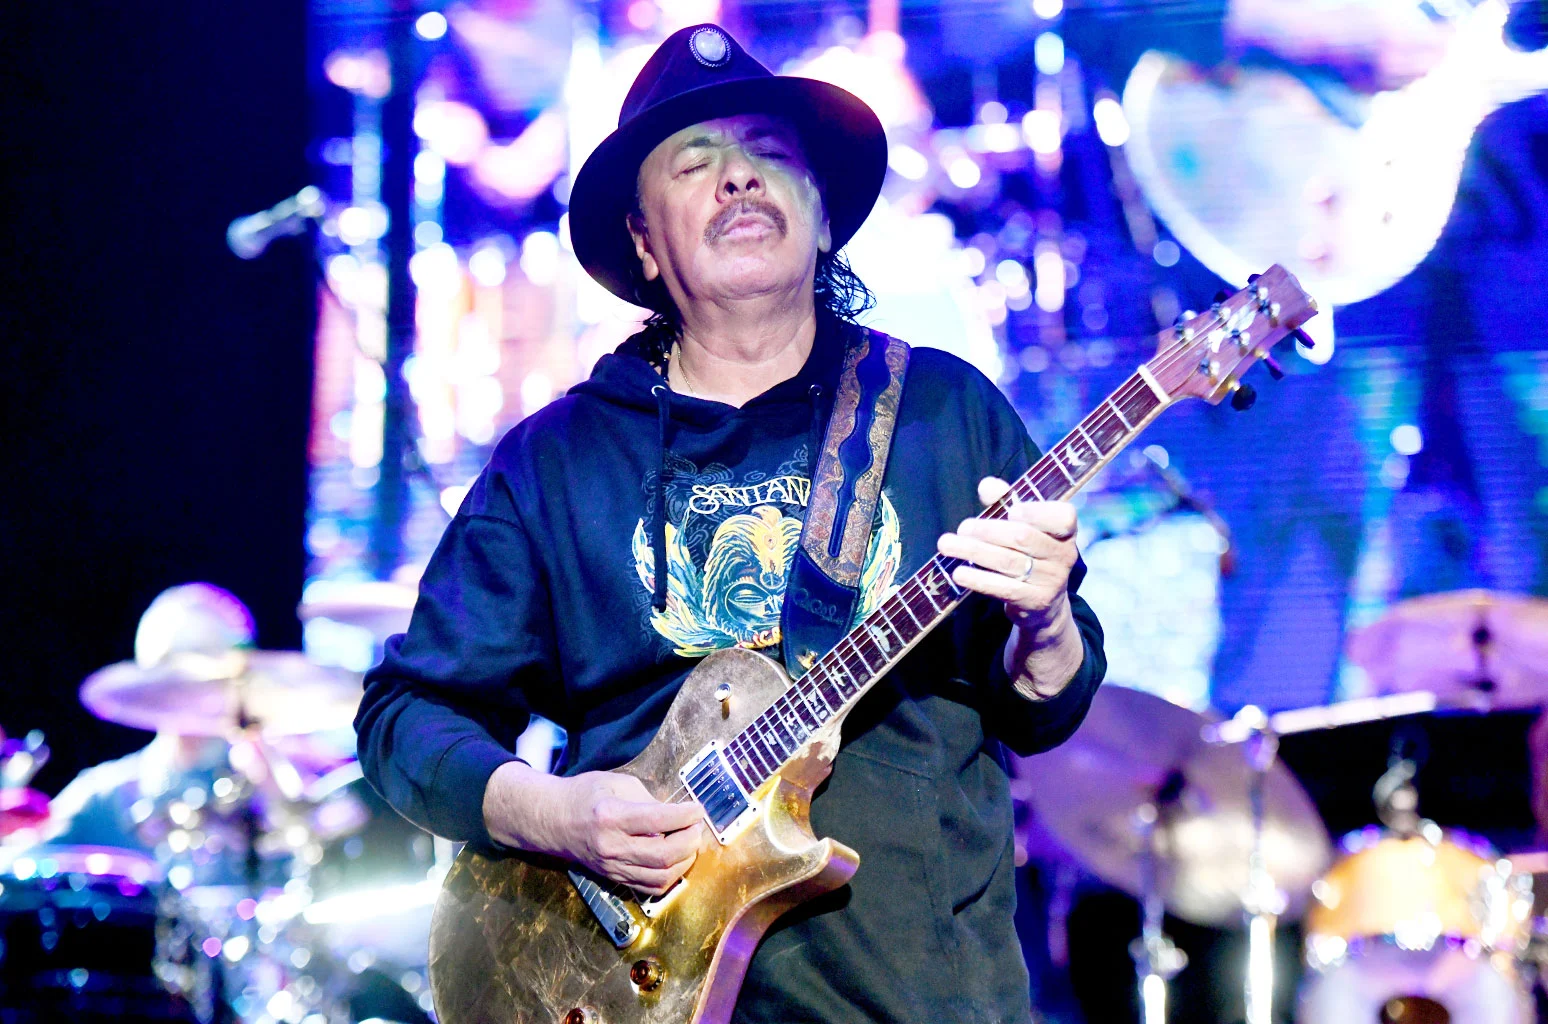 "Carlos Santana suffered dehydration, Collapsed on Stage in Michigan"